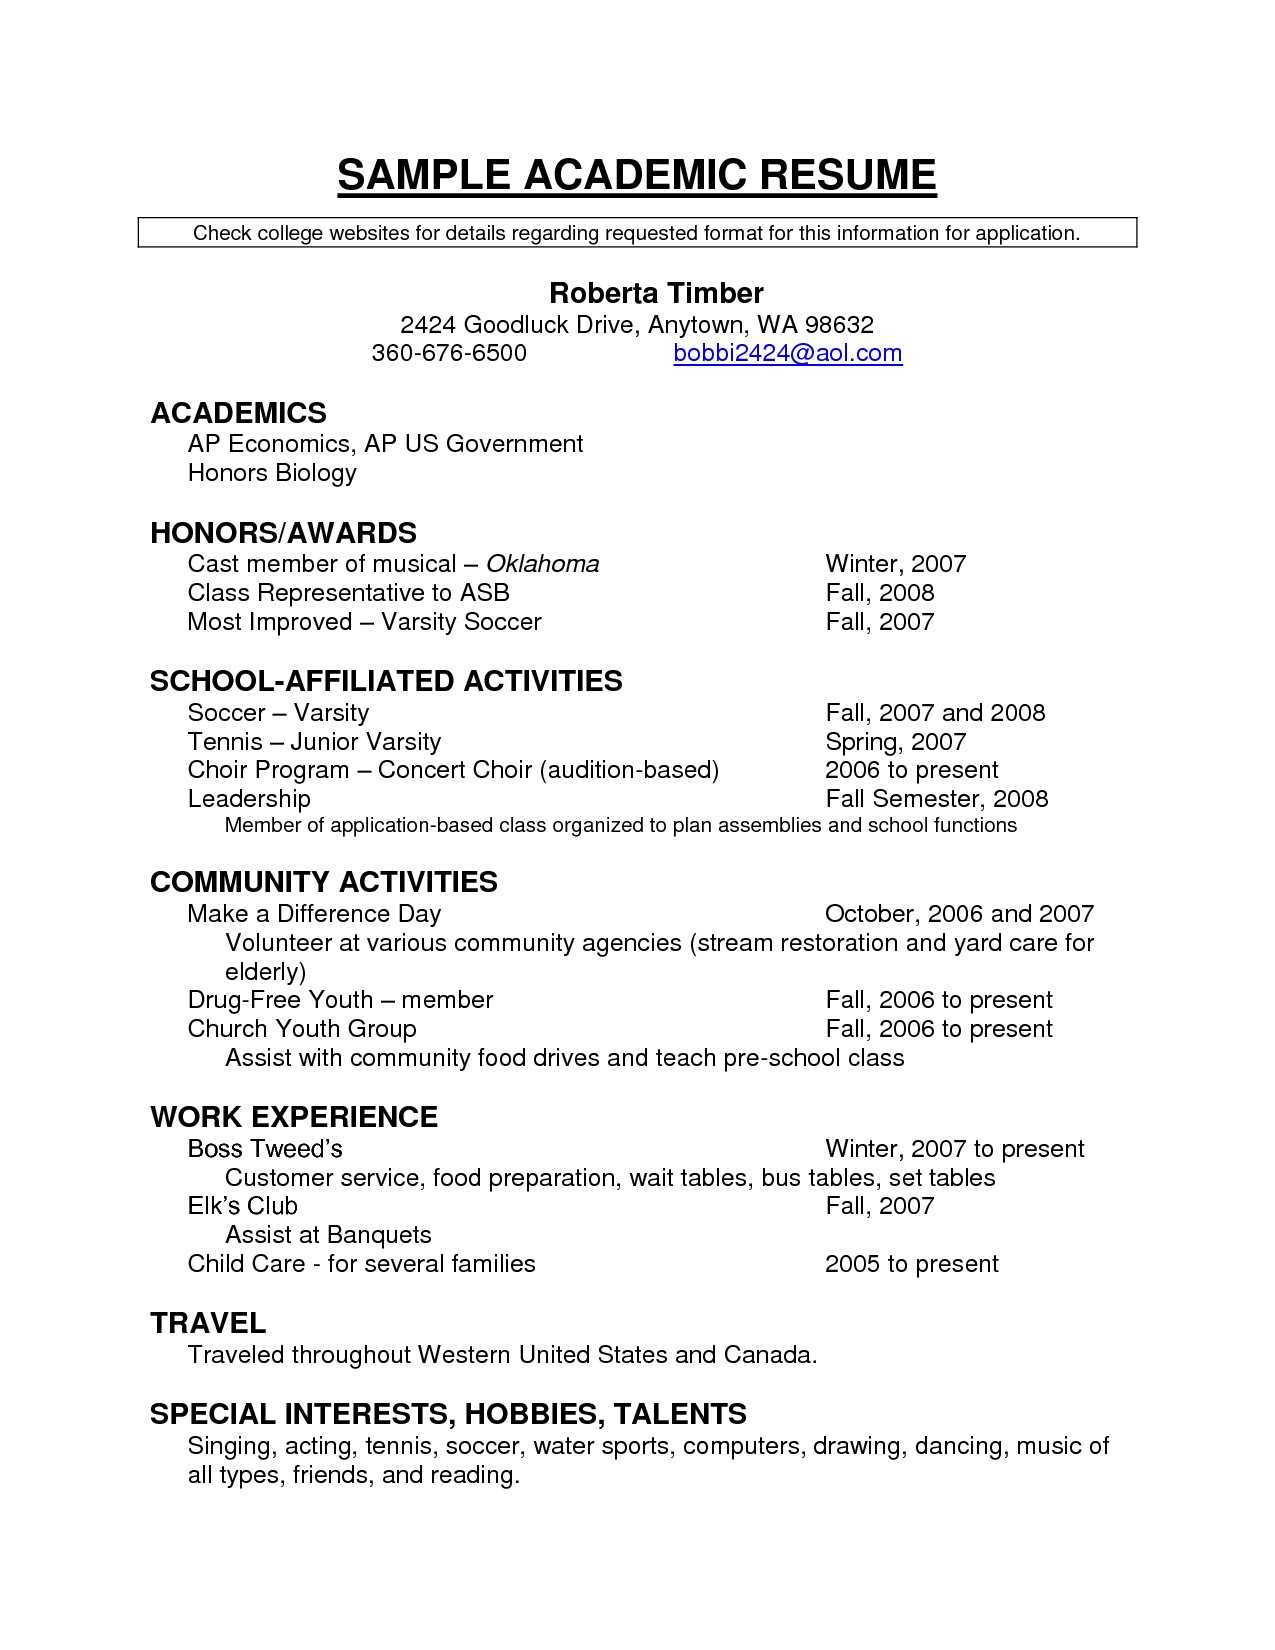 new resume templates business analyst resume template word new